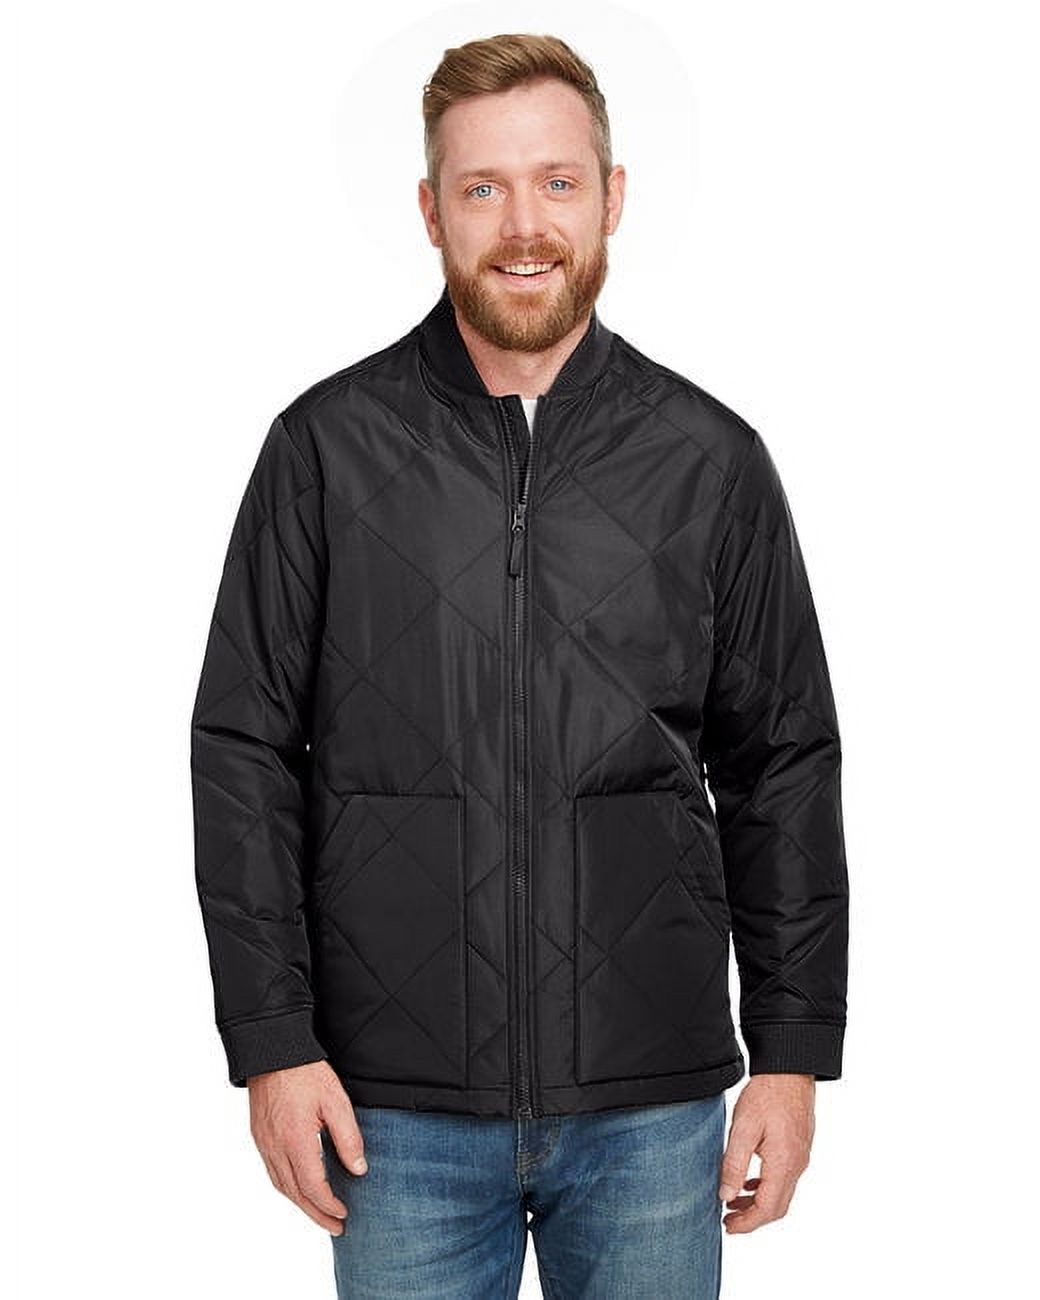 Adult Dockside Insulated Utility Jacket - DARK CHARCOAL - M - image 1 of 3